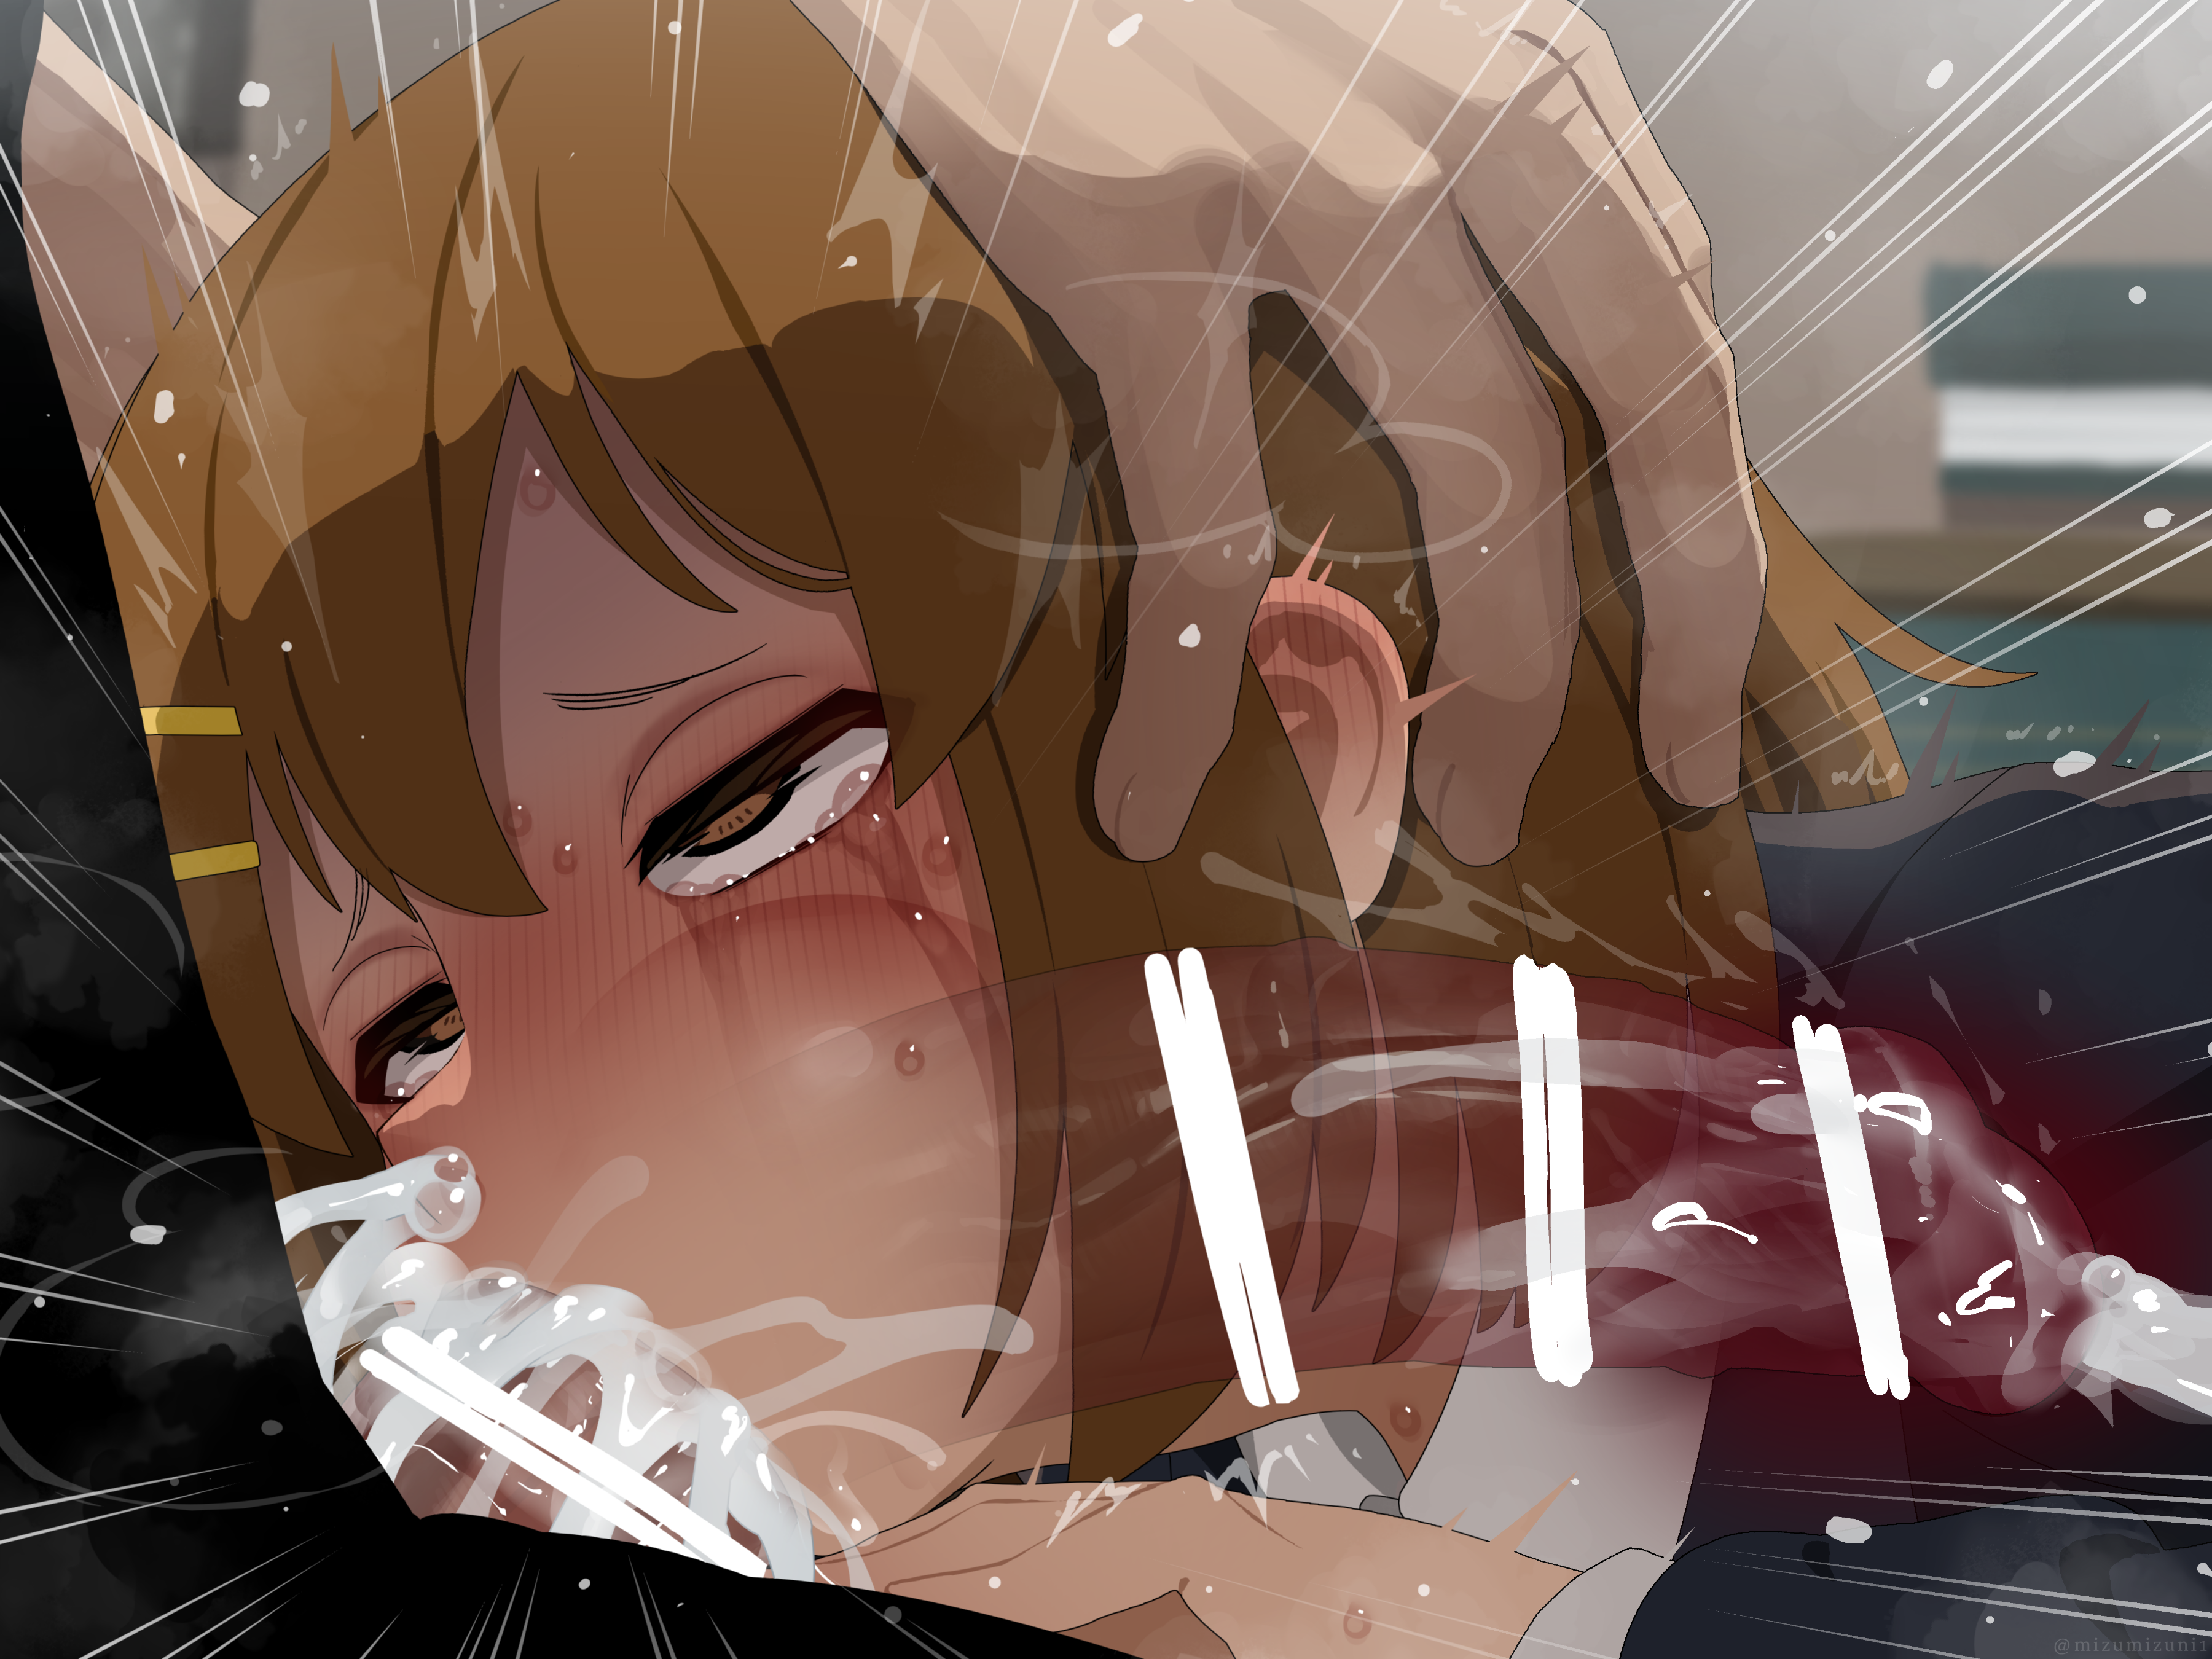 Dive into the world of anime deep throat with these steamy pics